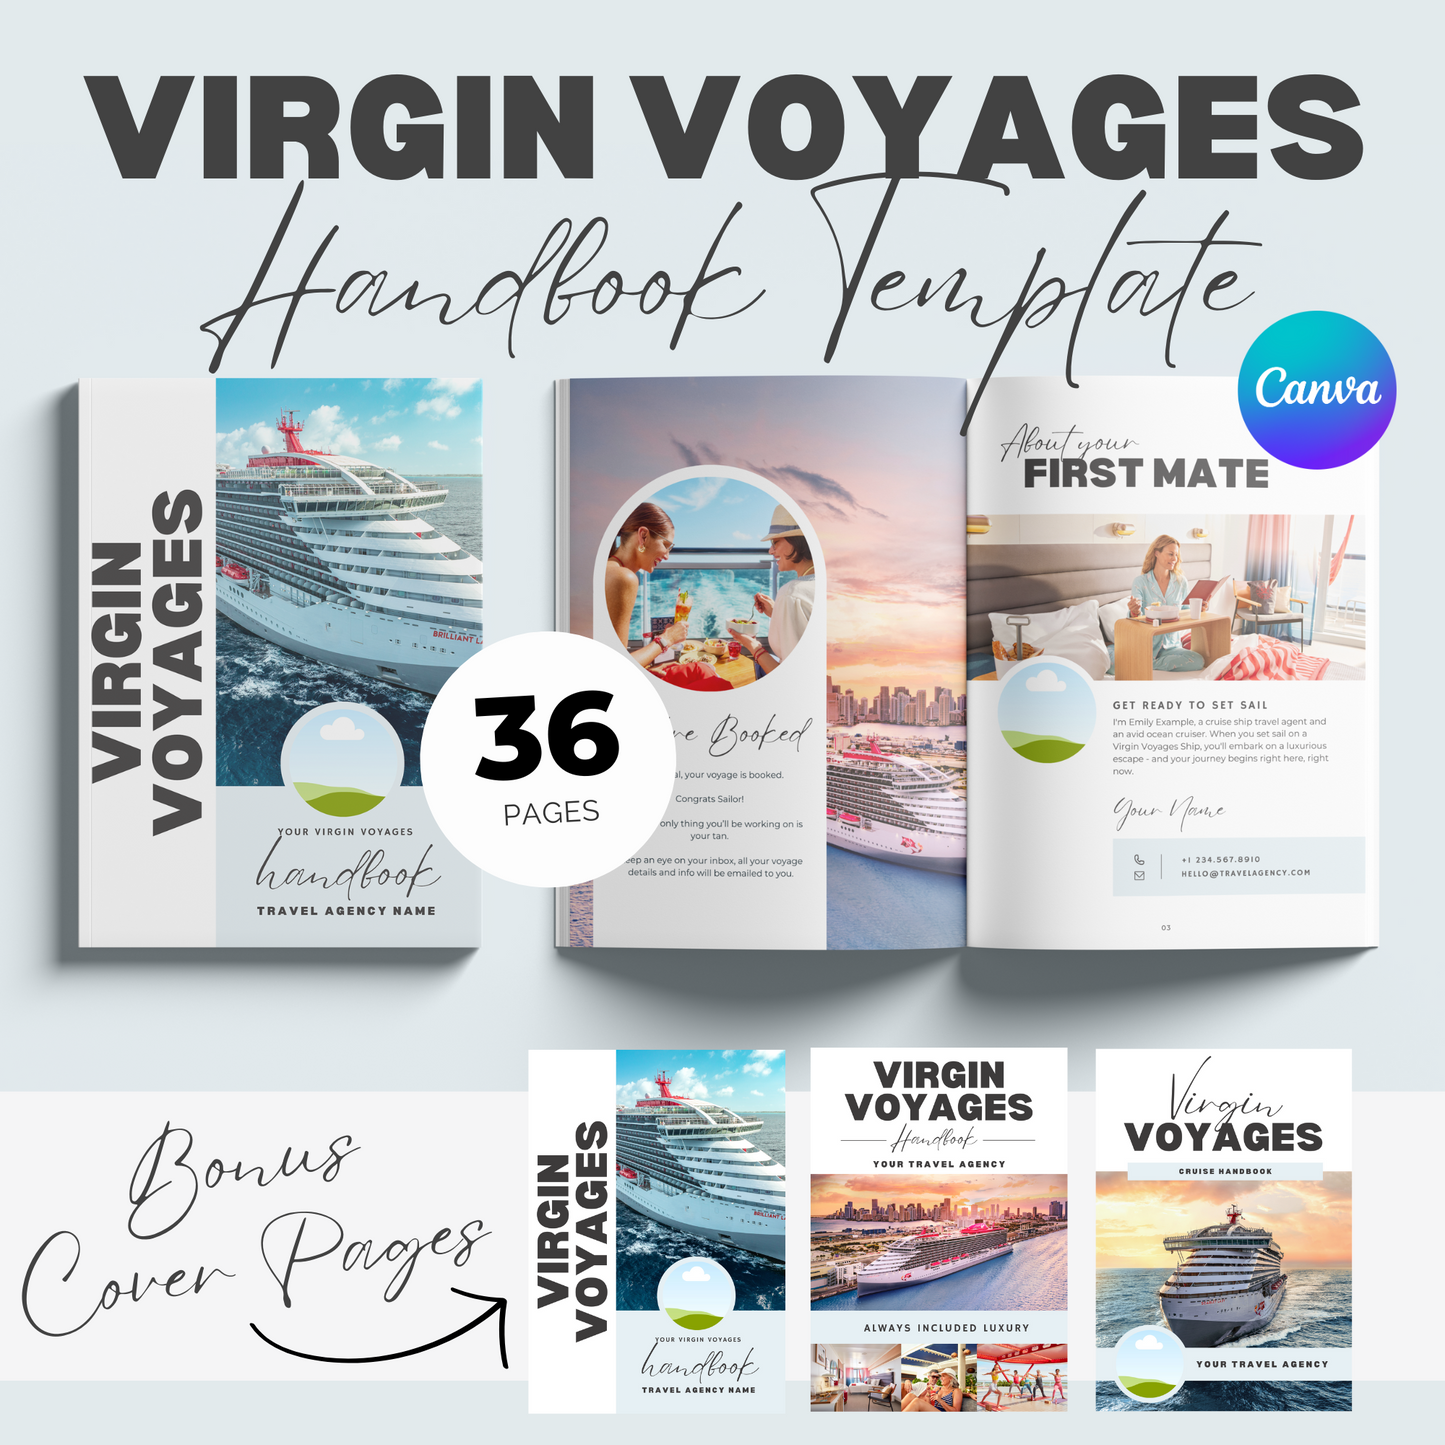 Virgin Voyages Cruise Handbook Canva Template for First Mates